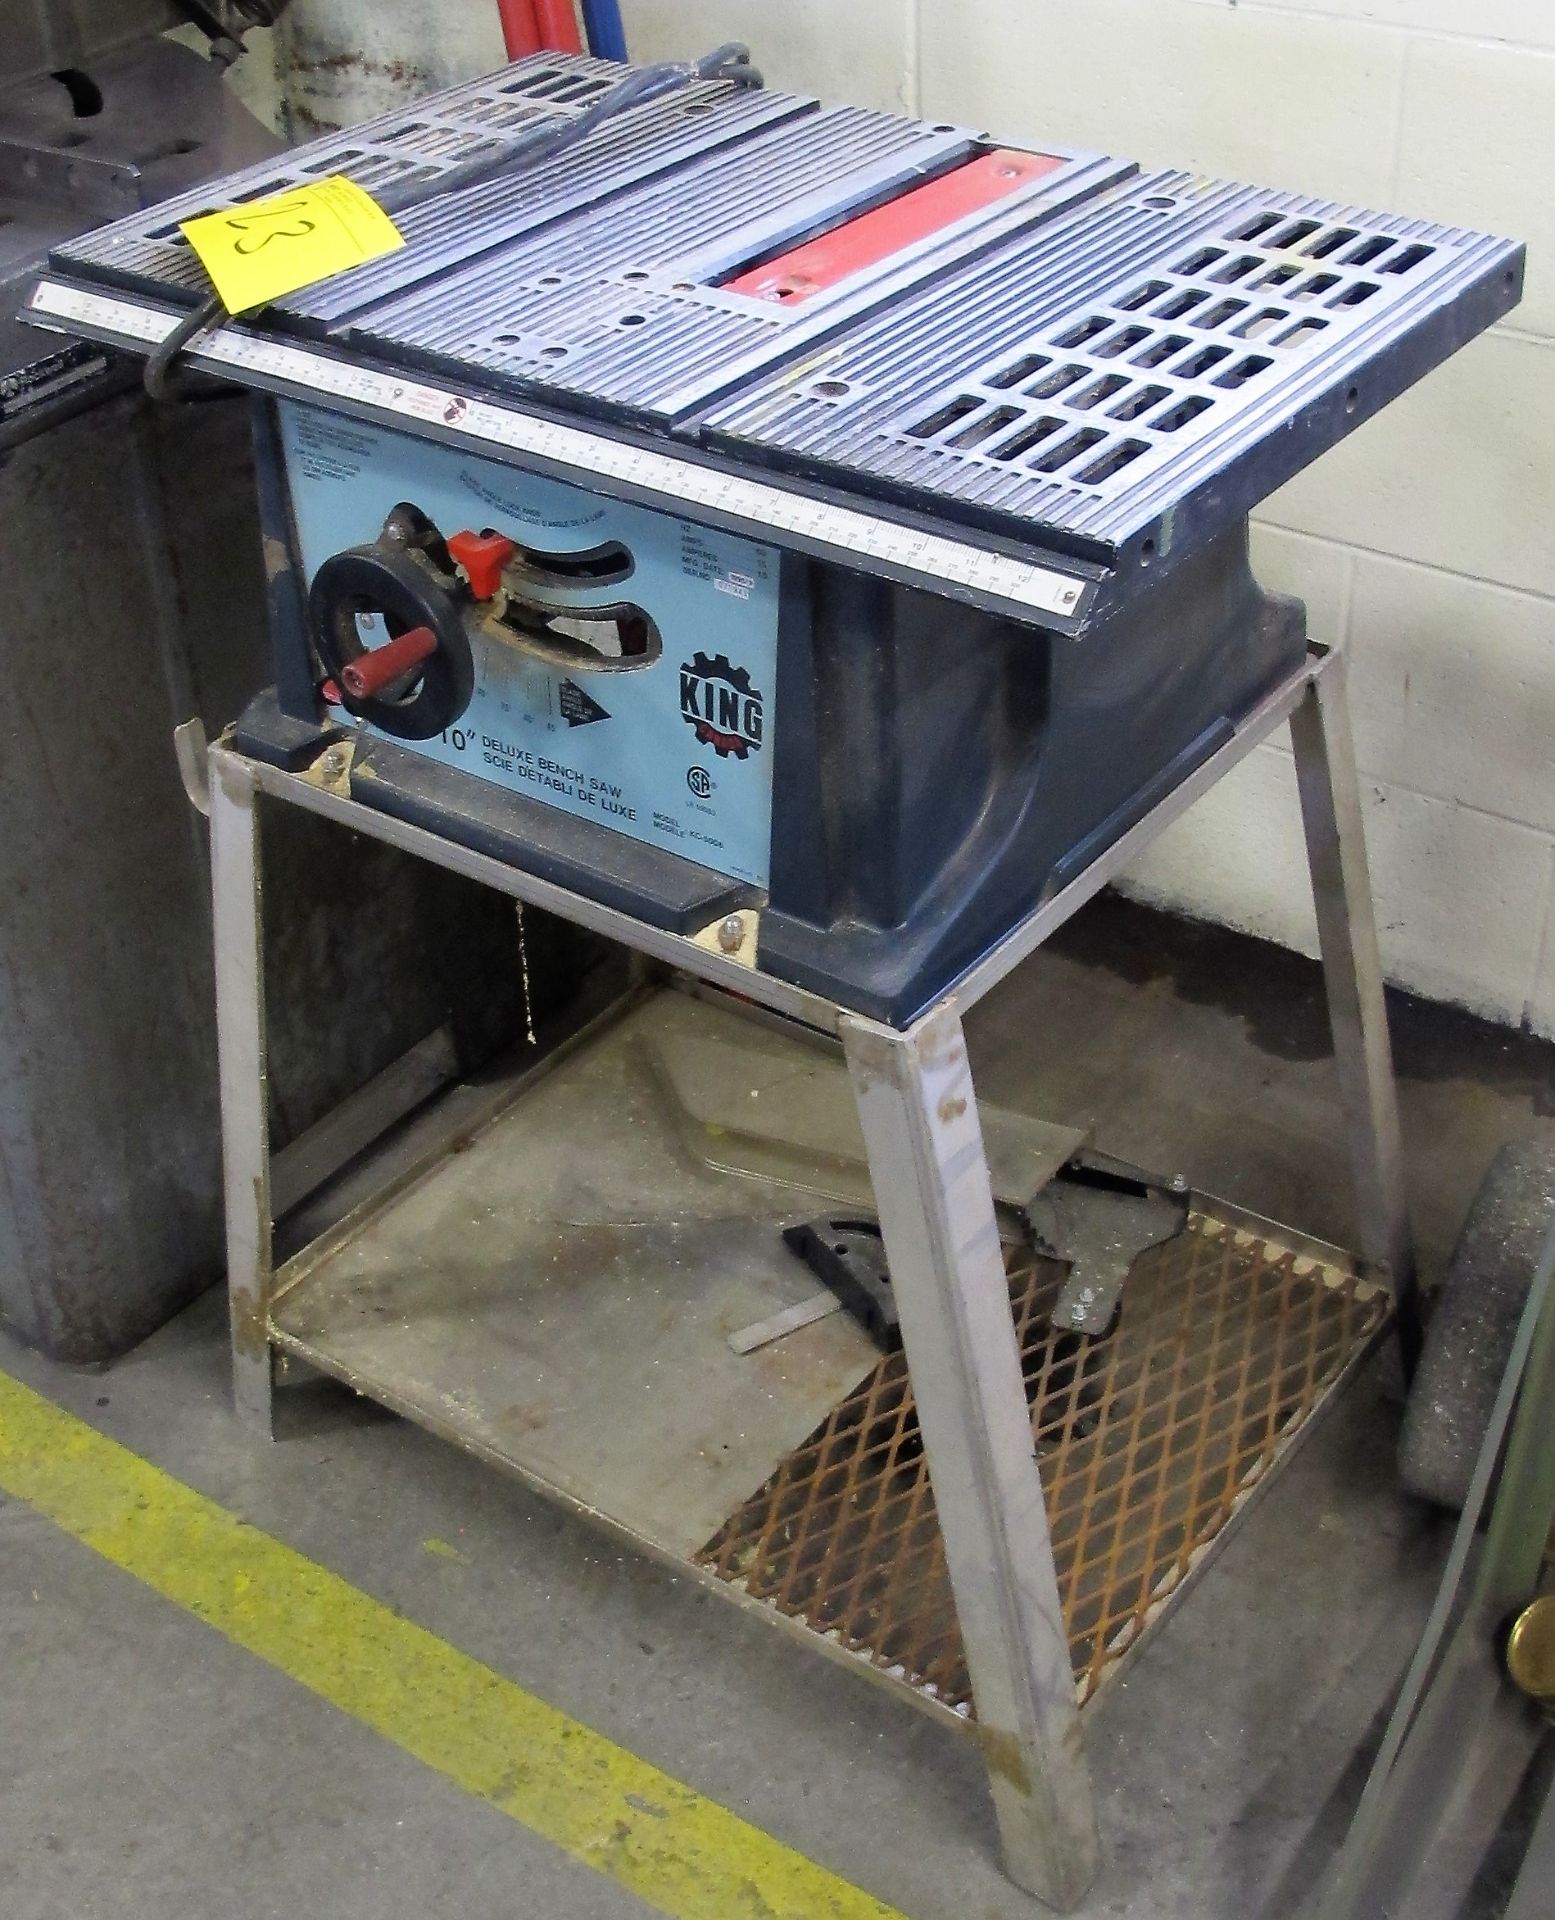 KING CANADA KC-5006 10" DELUXE BENCH SAW, 5,000 RPM - Image 2 of 2